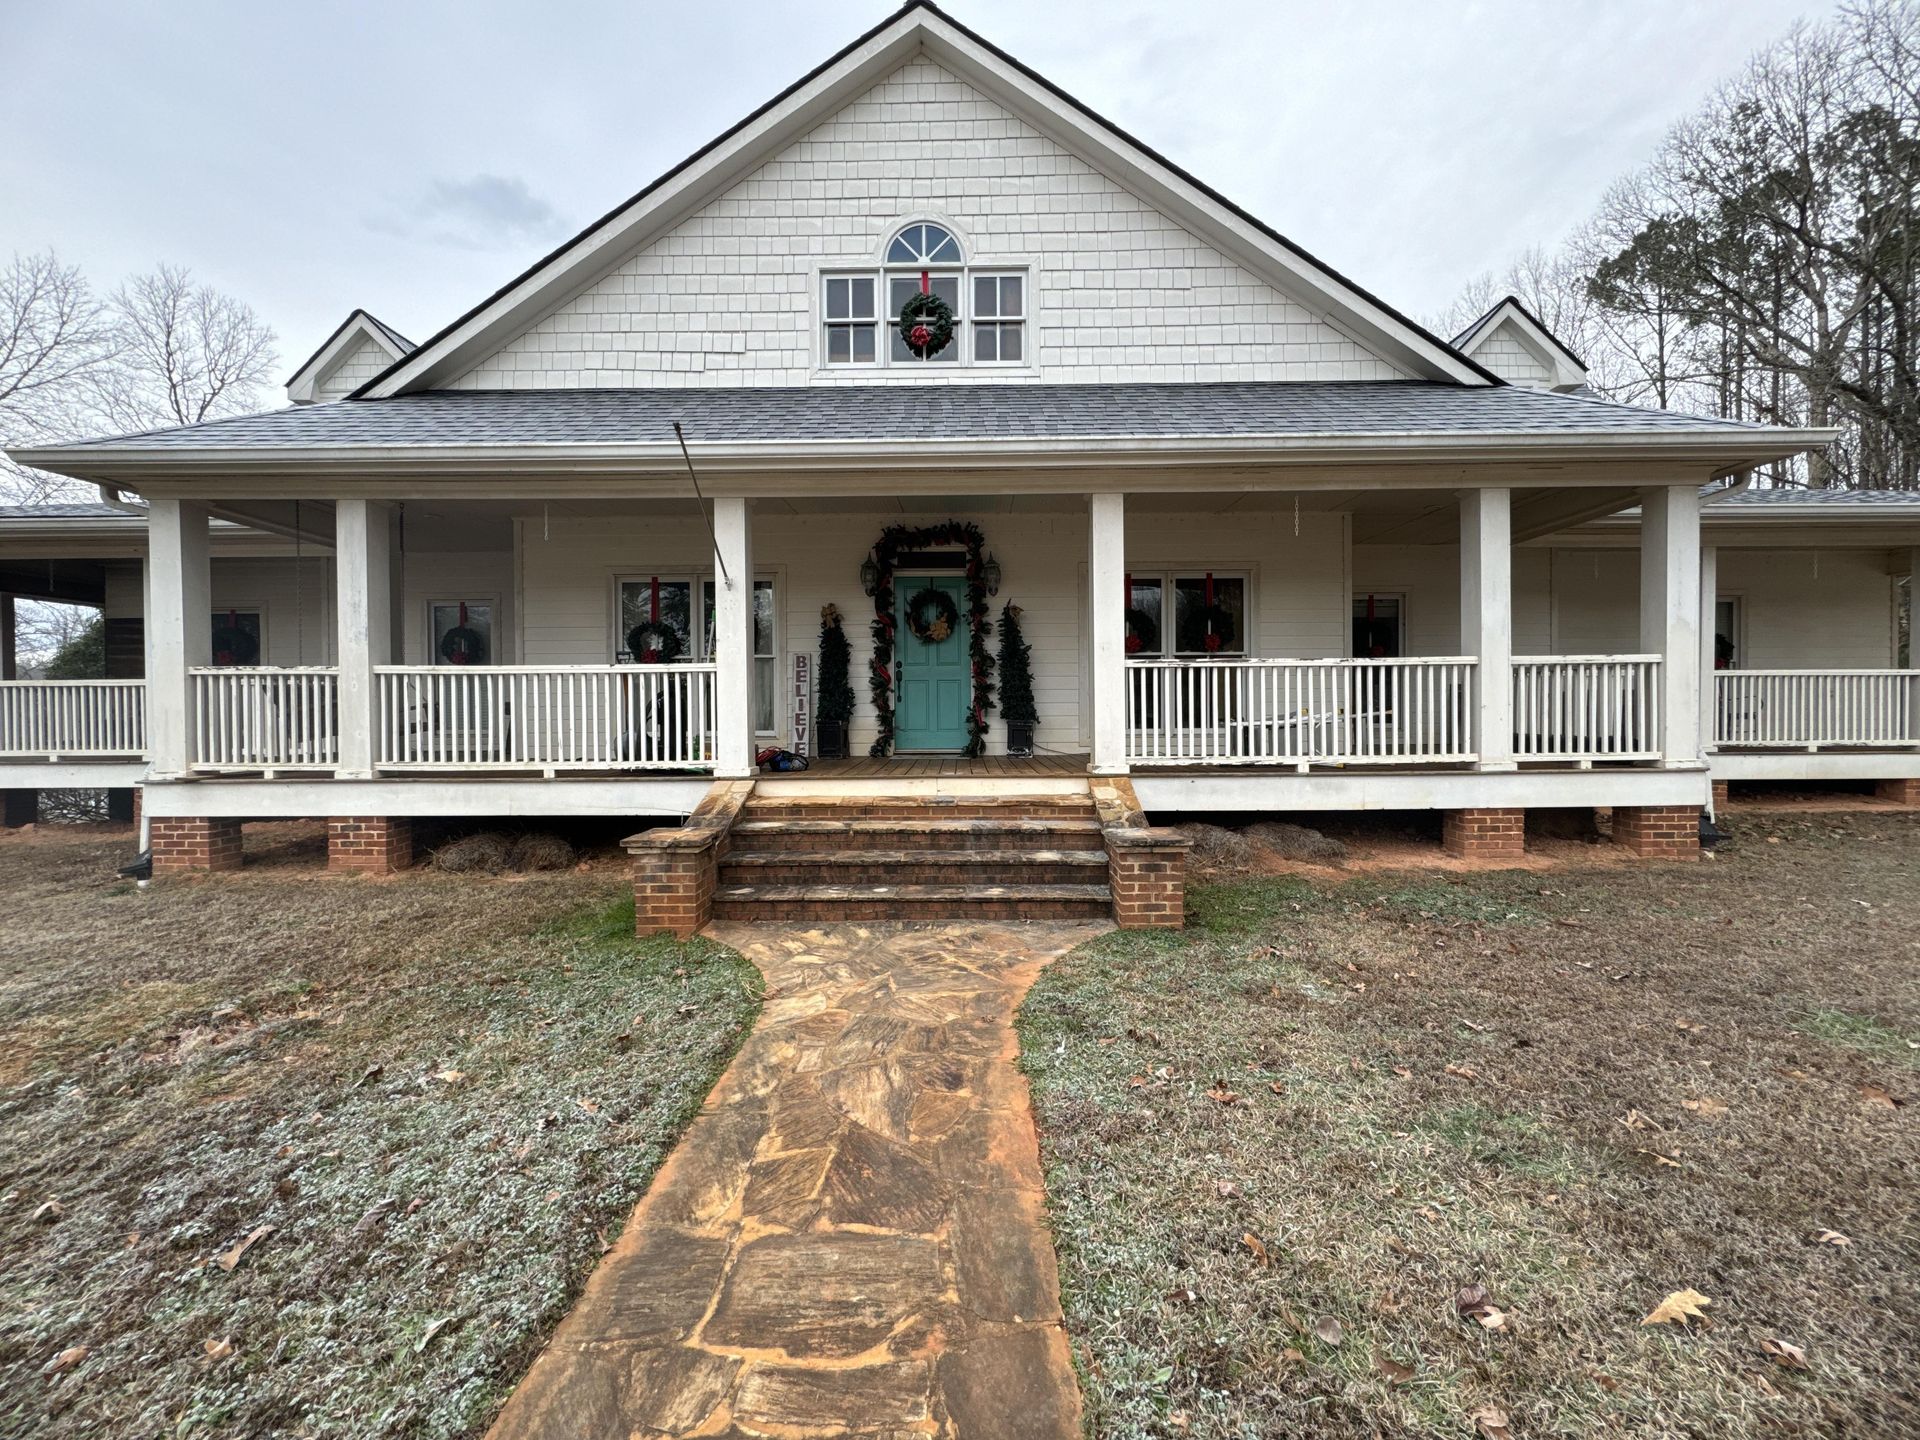 A family home in Covington, Georgia, that has been damaged by fire and is in need of restoration